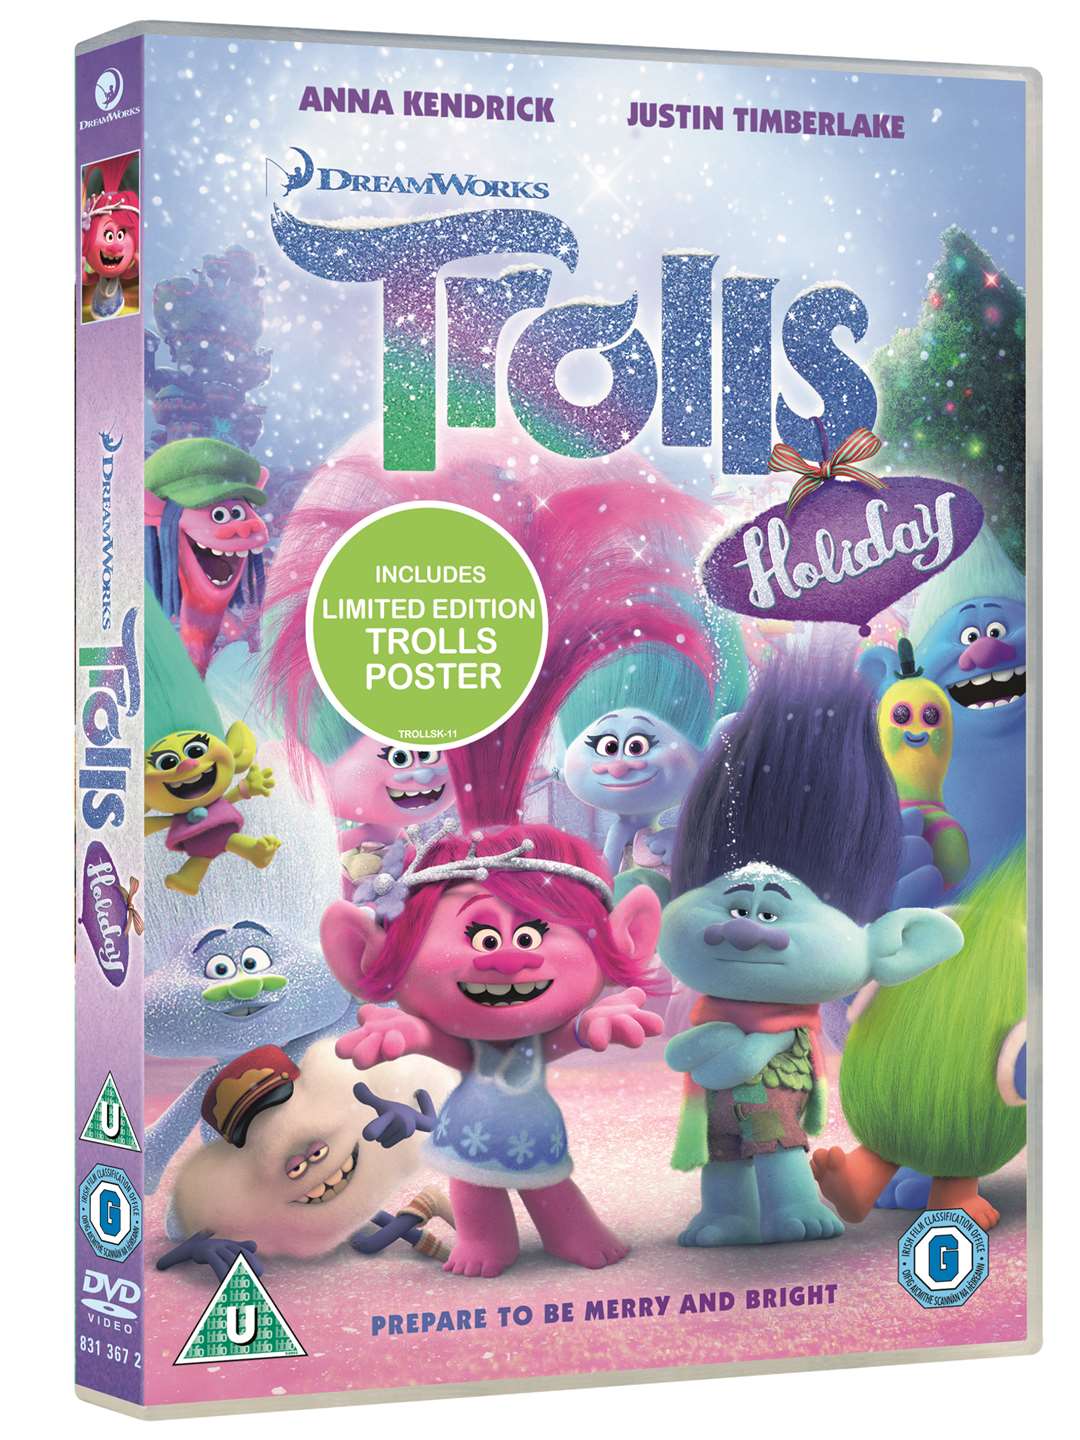 Trolls Holiday has just been released